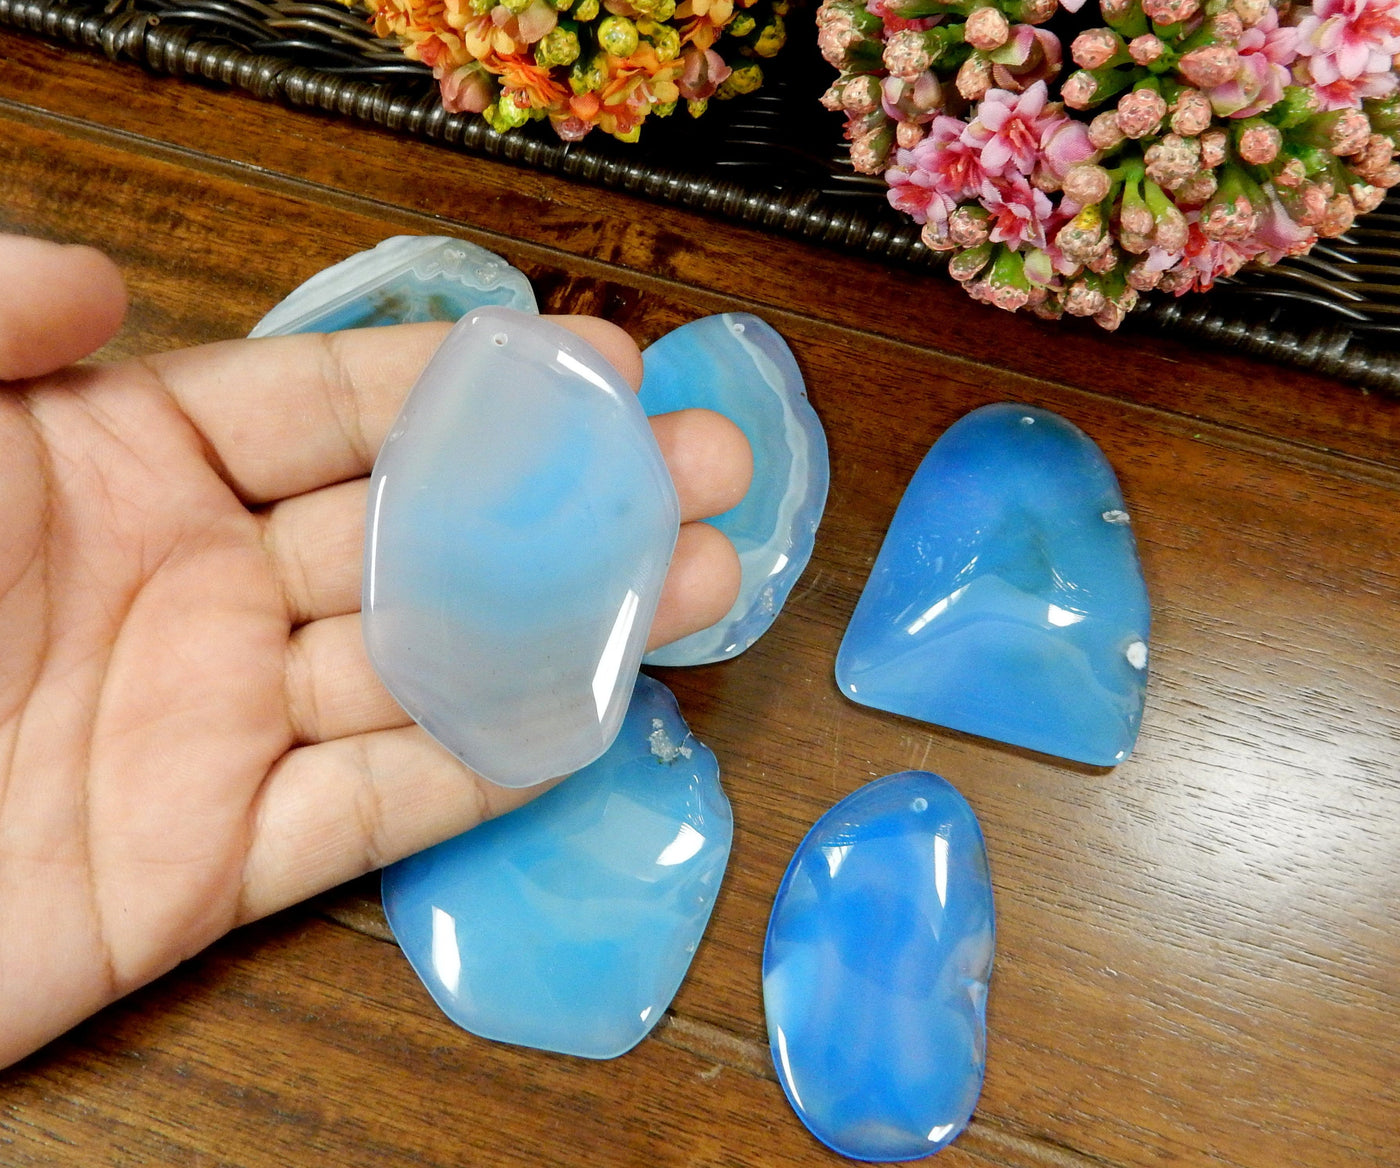 Light Blue Drilled Freeform Agate Slices With Polished Edge in Hand on Wooden Background.